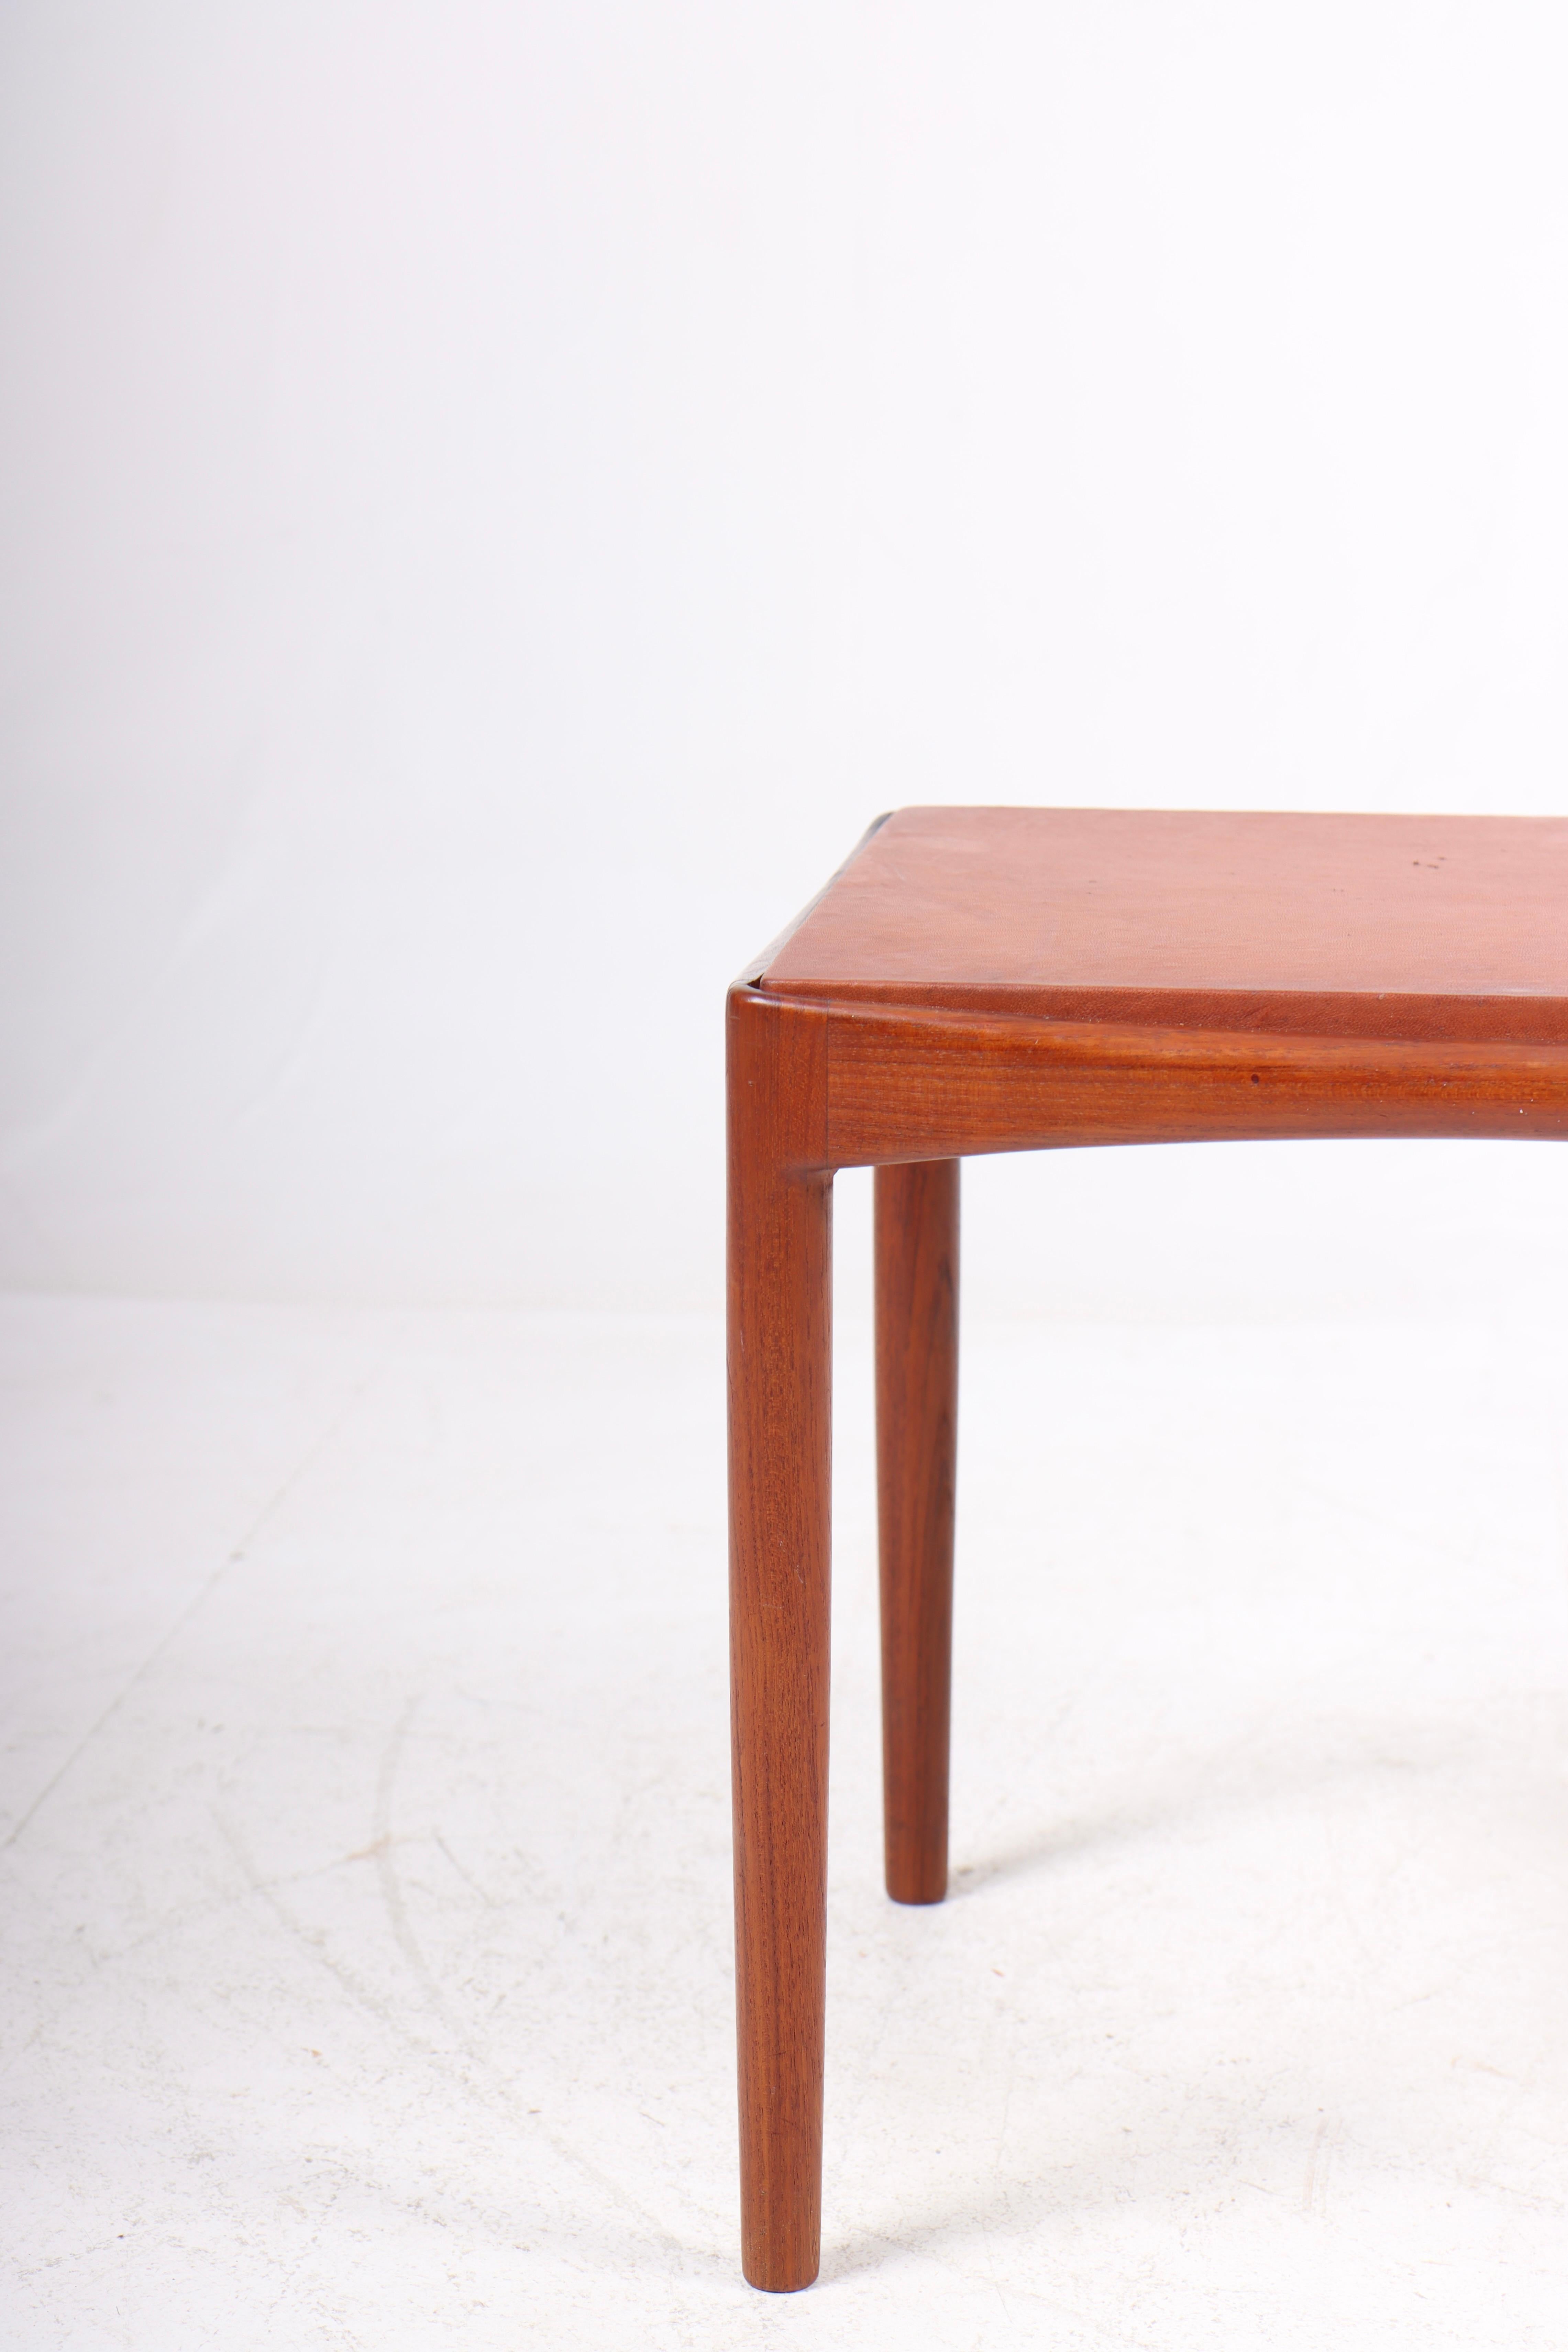 Rare Side Table in Teak and Leather by Ejner Larsen & Aksel Bender Madsen In Good Condition For Sale In Lejre, DK